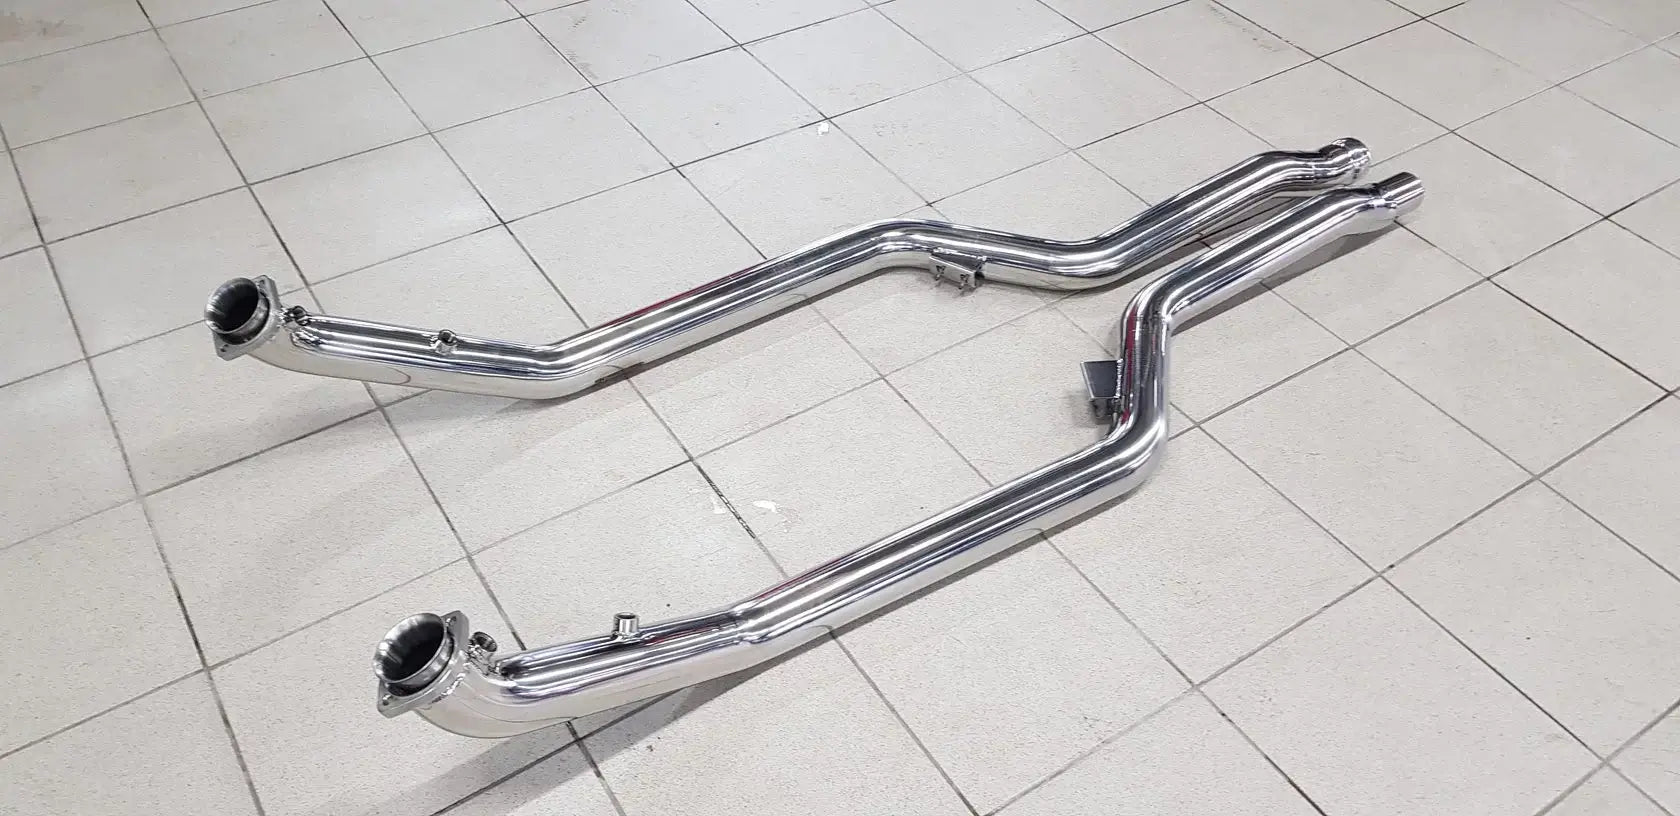 DEIKIN 10-MB.CLS63.W212-DP Downpipe for Mercedes-AMG CLS63 (w218) without HeatShield Photo-3 